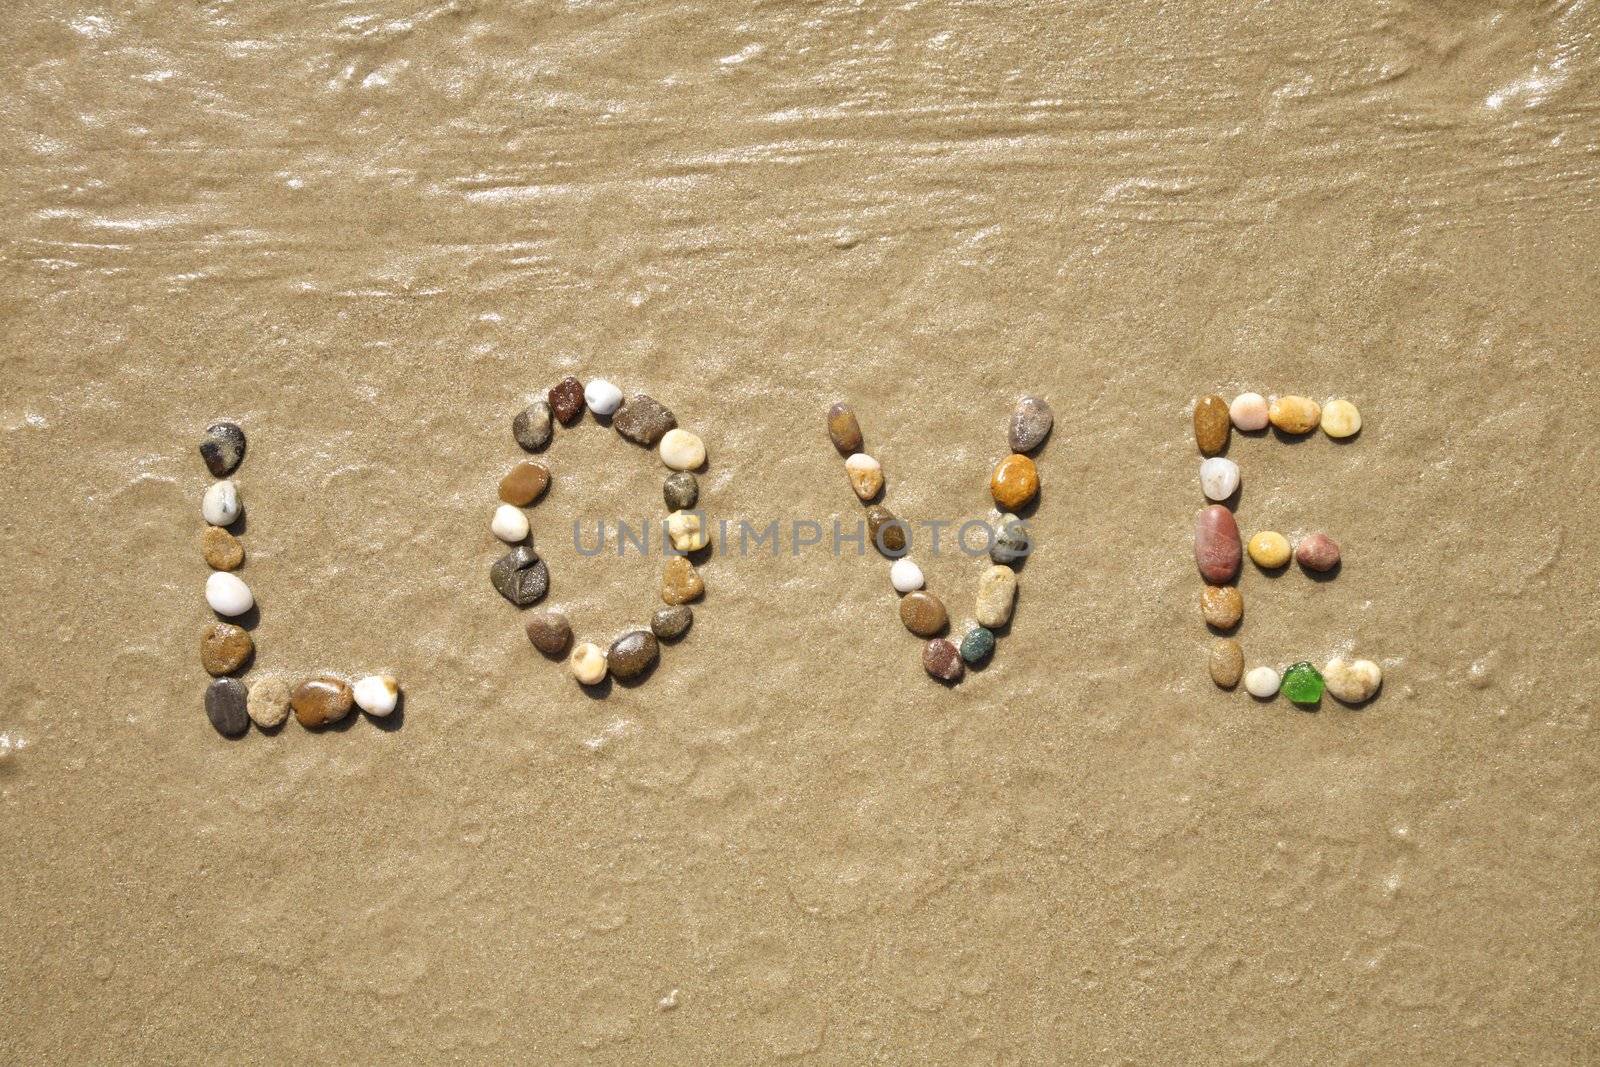 Love word writing with small stones on sand beach ground